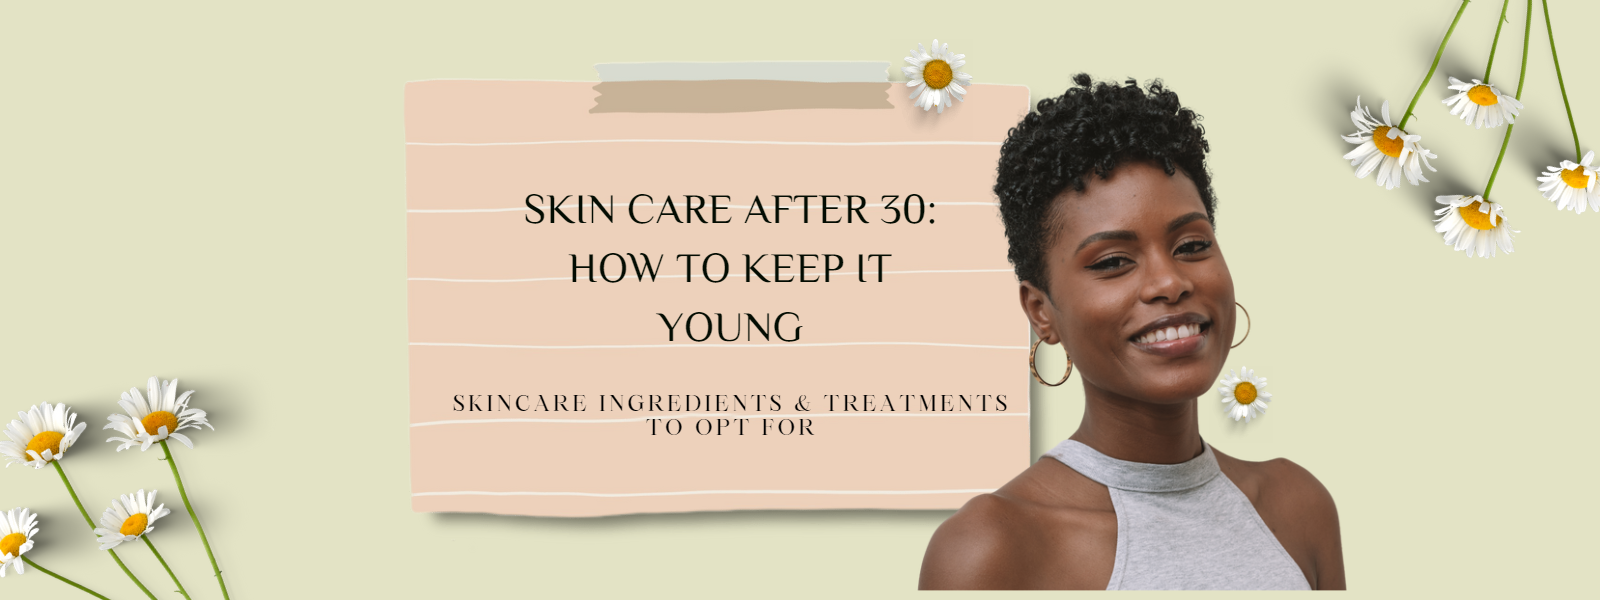 Skincare after 30: How to keep it young